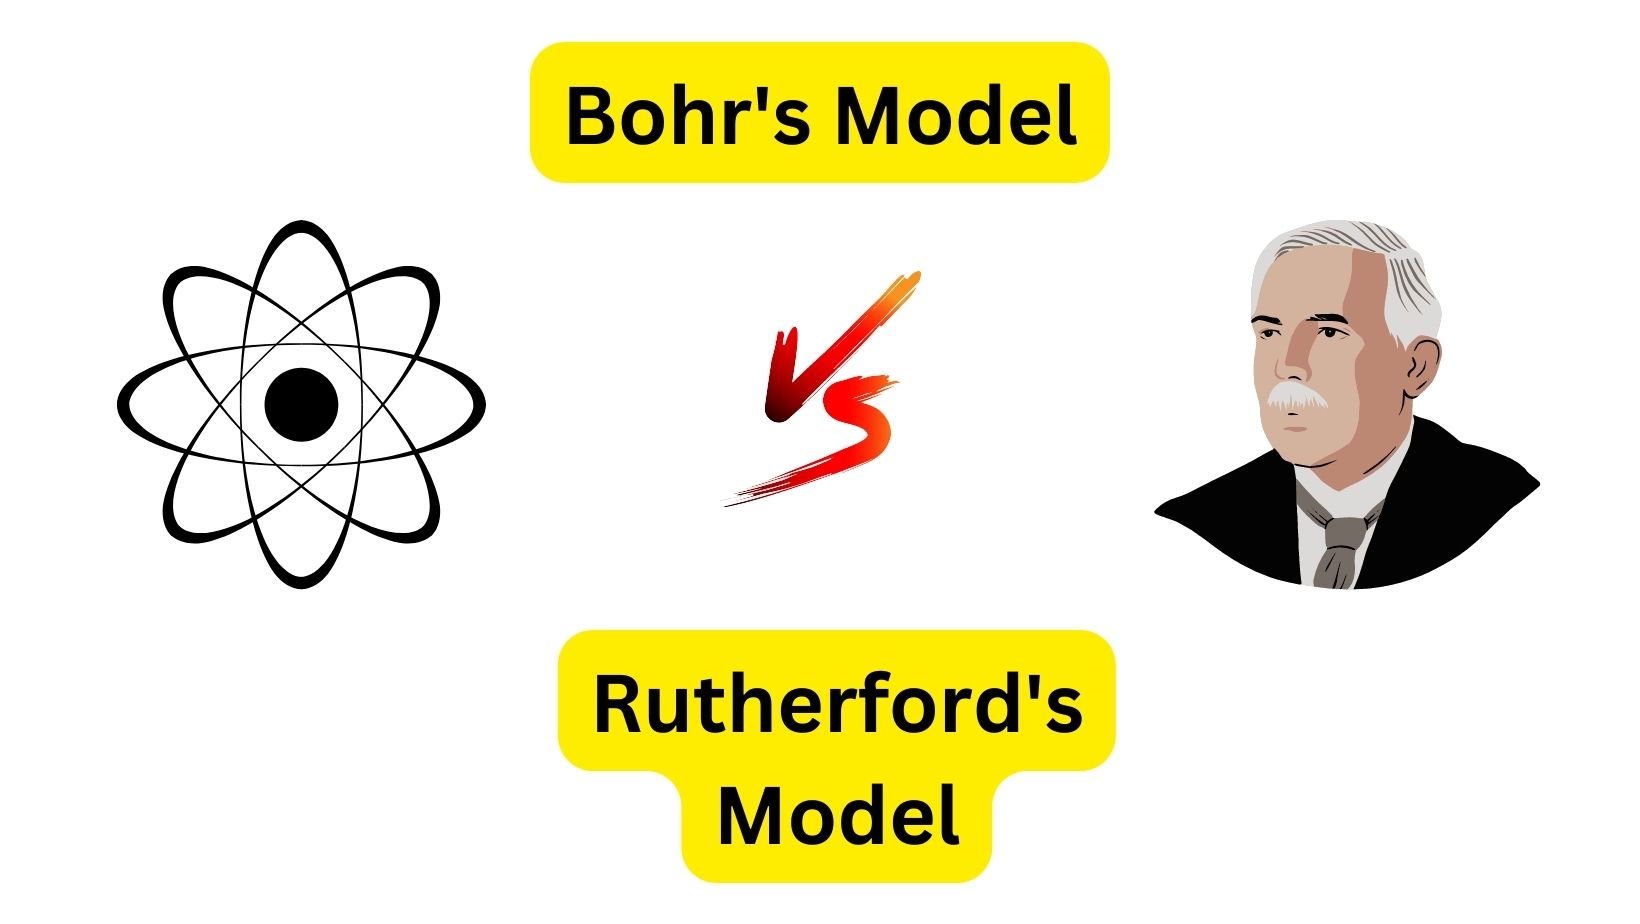 Bohr Model of the Atom and the Rutherford Model